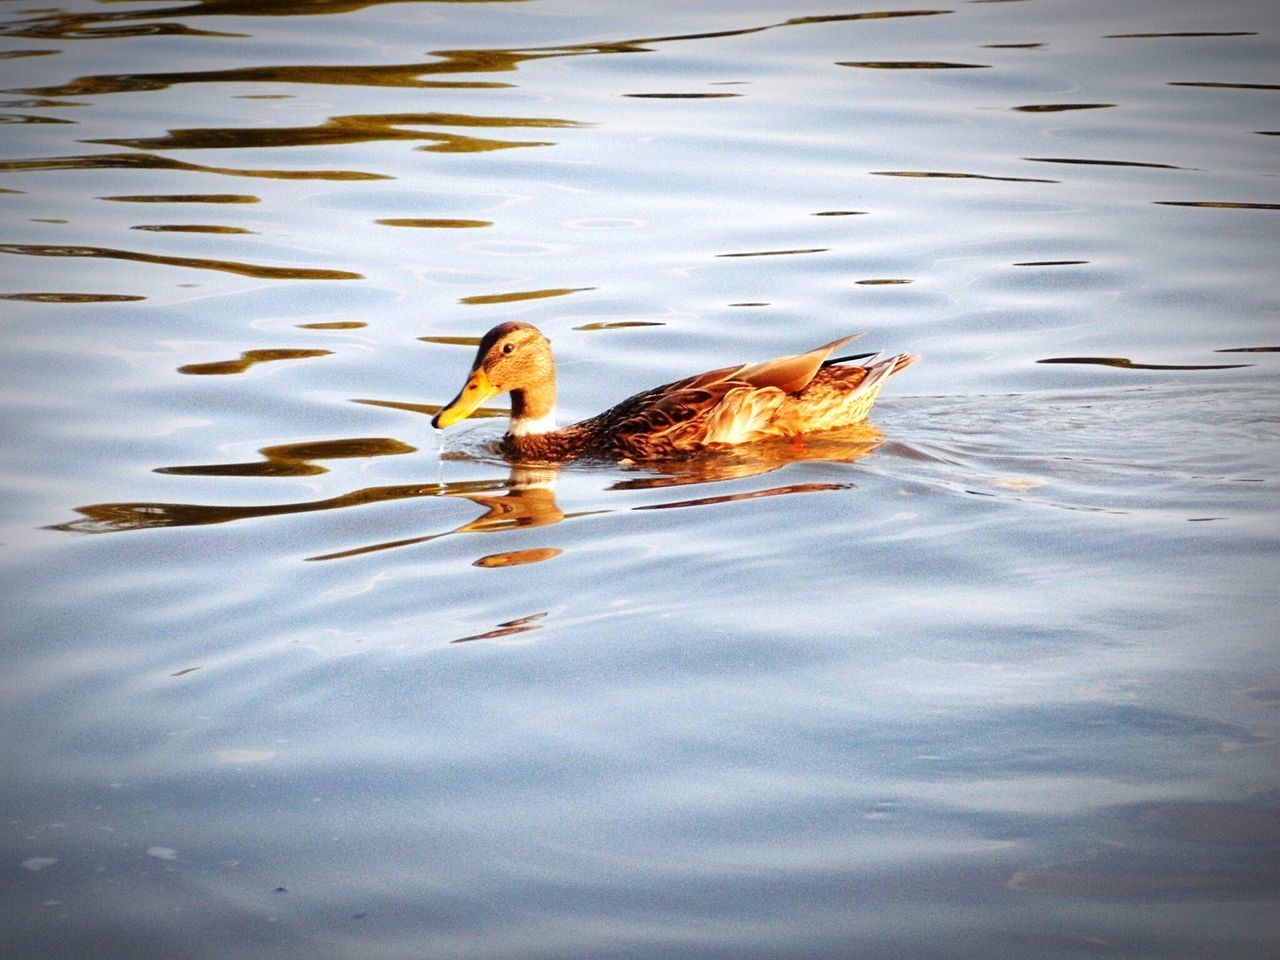 animal themes, water, bird, reflection, animals in the wild, wildlife, high angle view, lake, duck, waterfront, nature, pond, swimming, one animal, rippled, outdoors, sunlight, no people, sunset, puddle